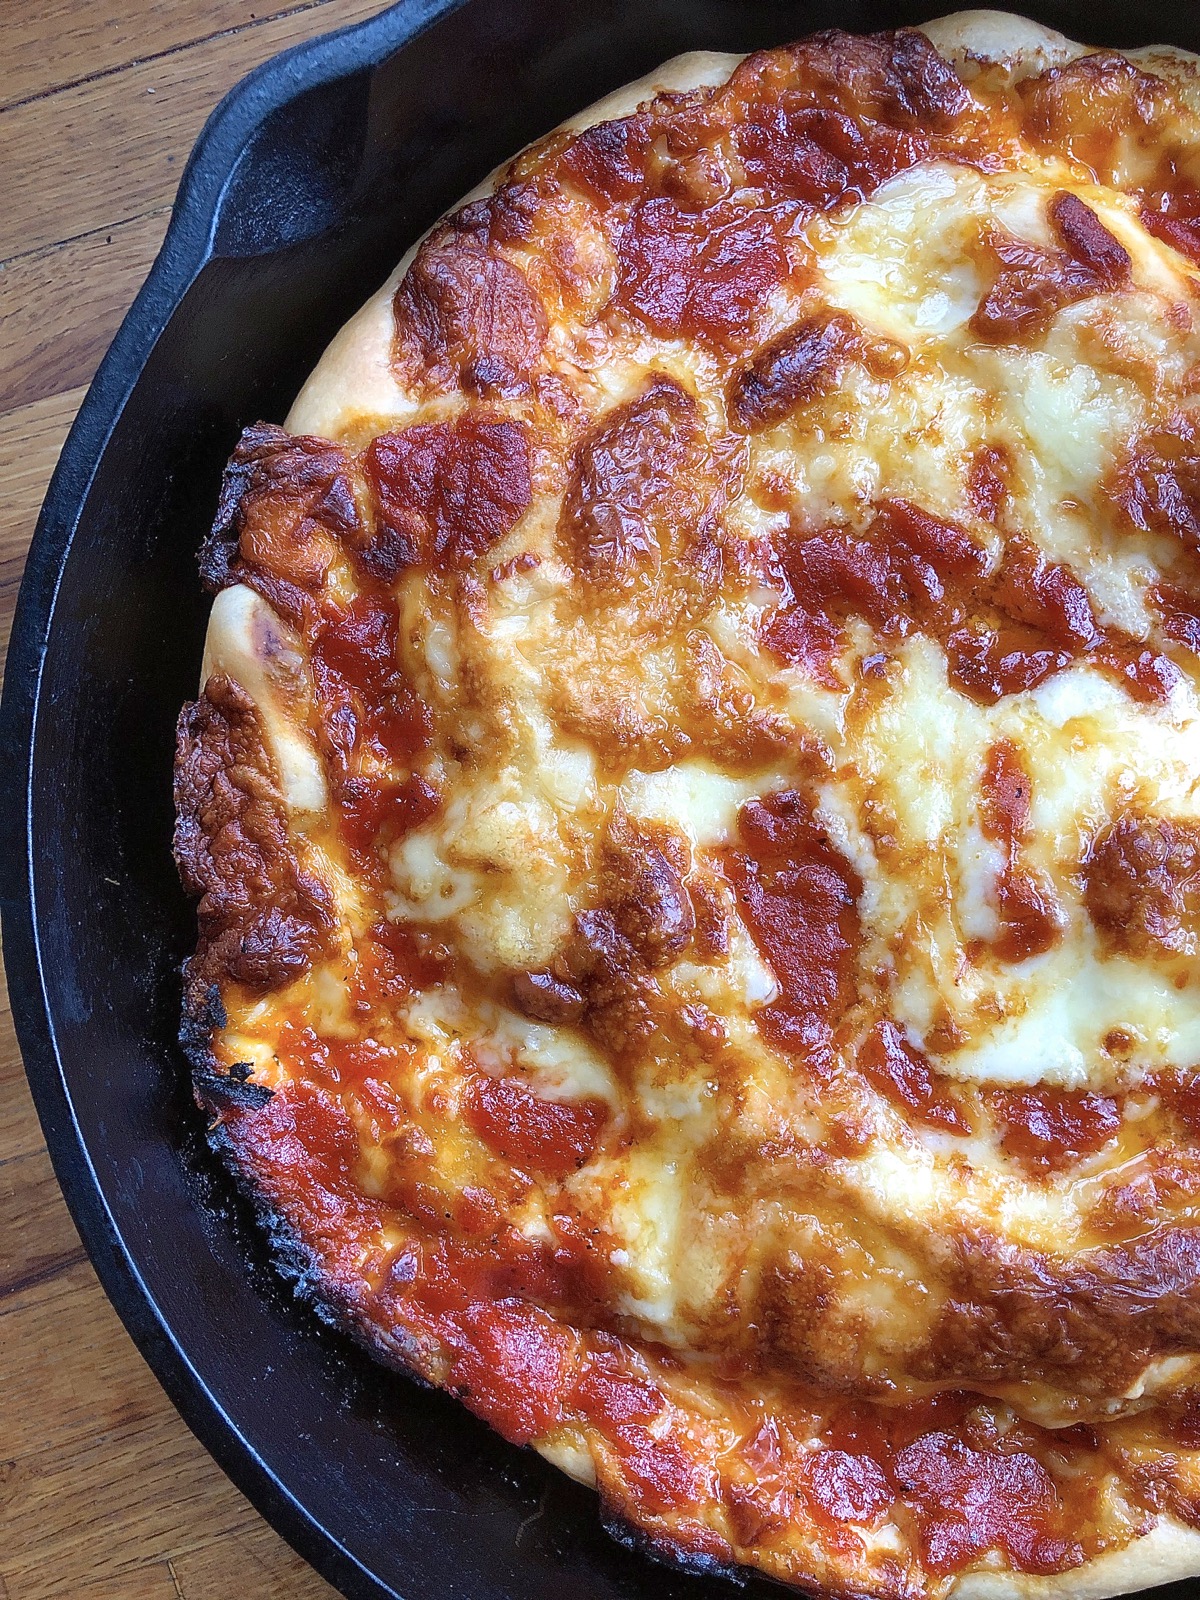 Pizza baked in a cast iron pan, hot from the oven.